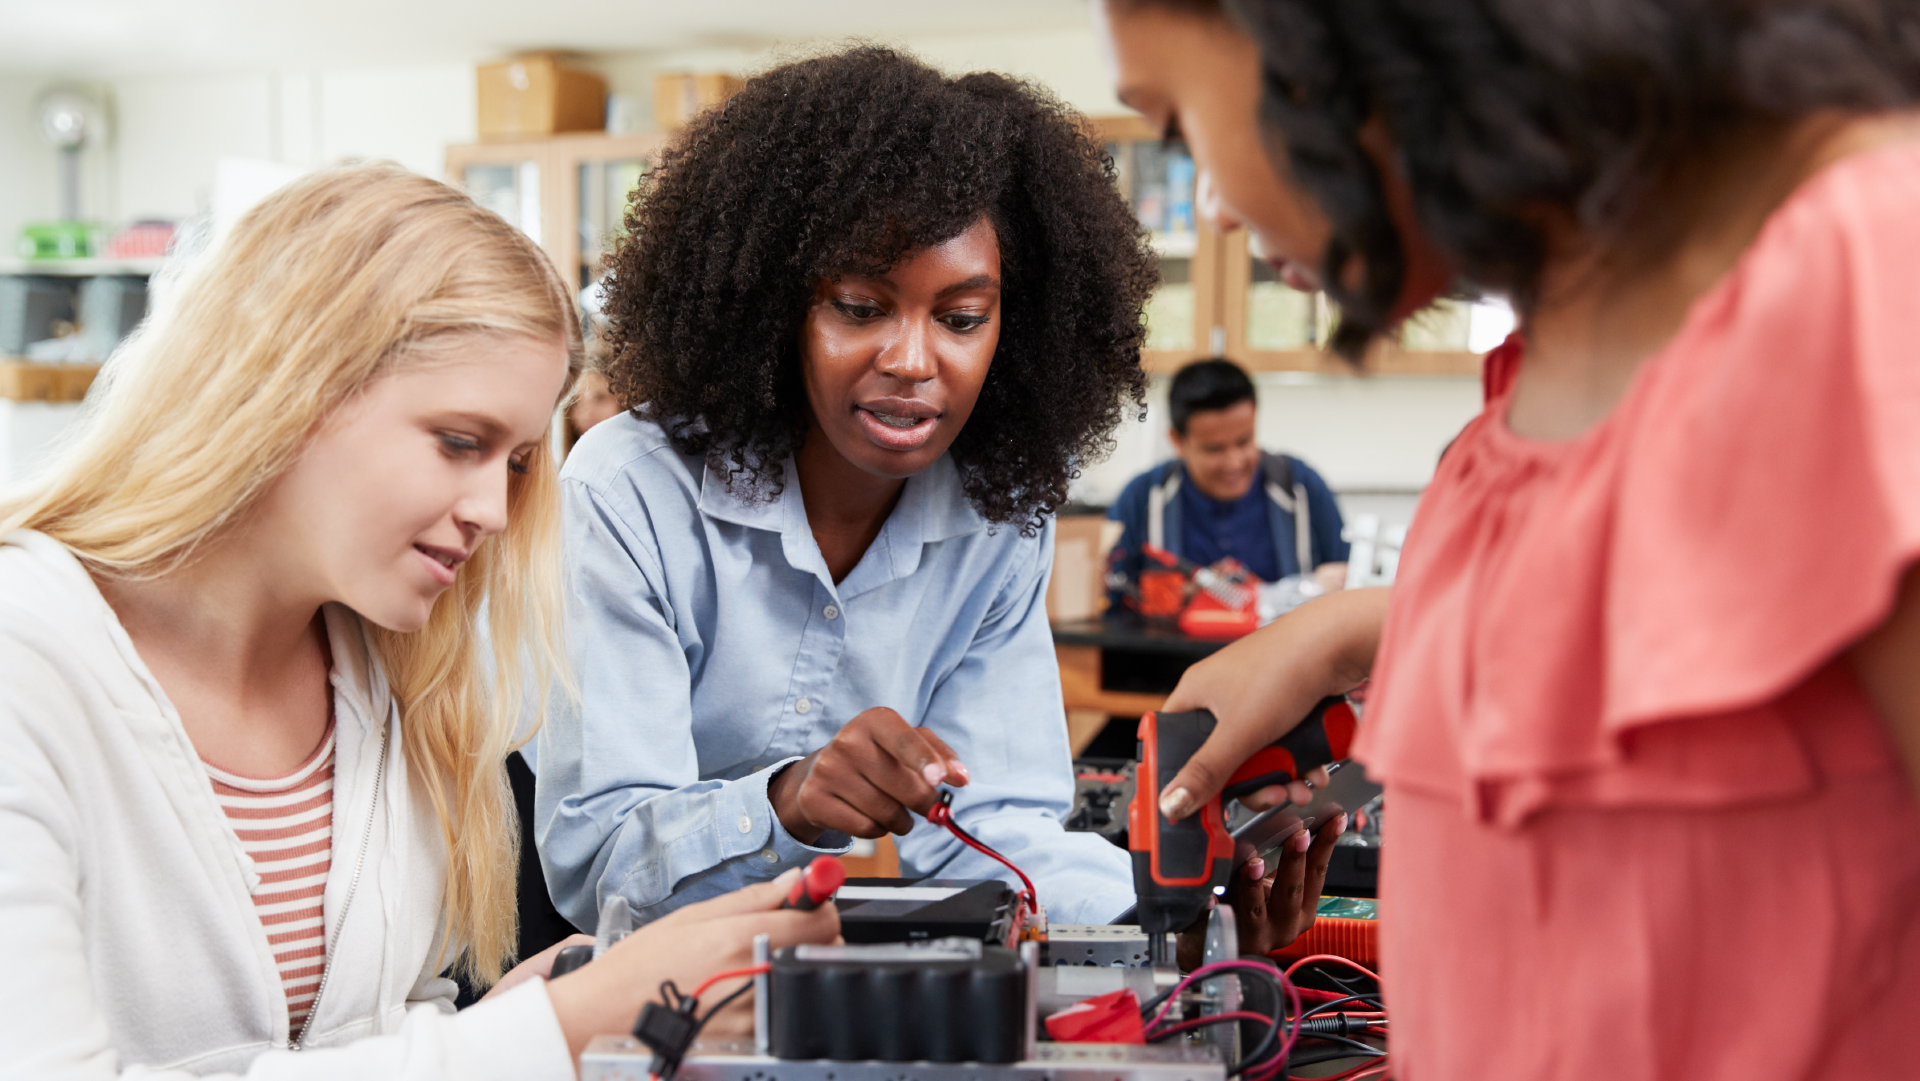 Women in STEM: Where are we at and where are we heading?